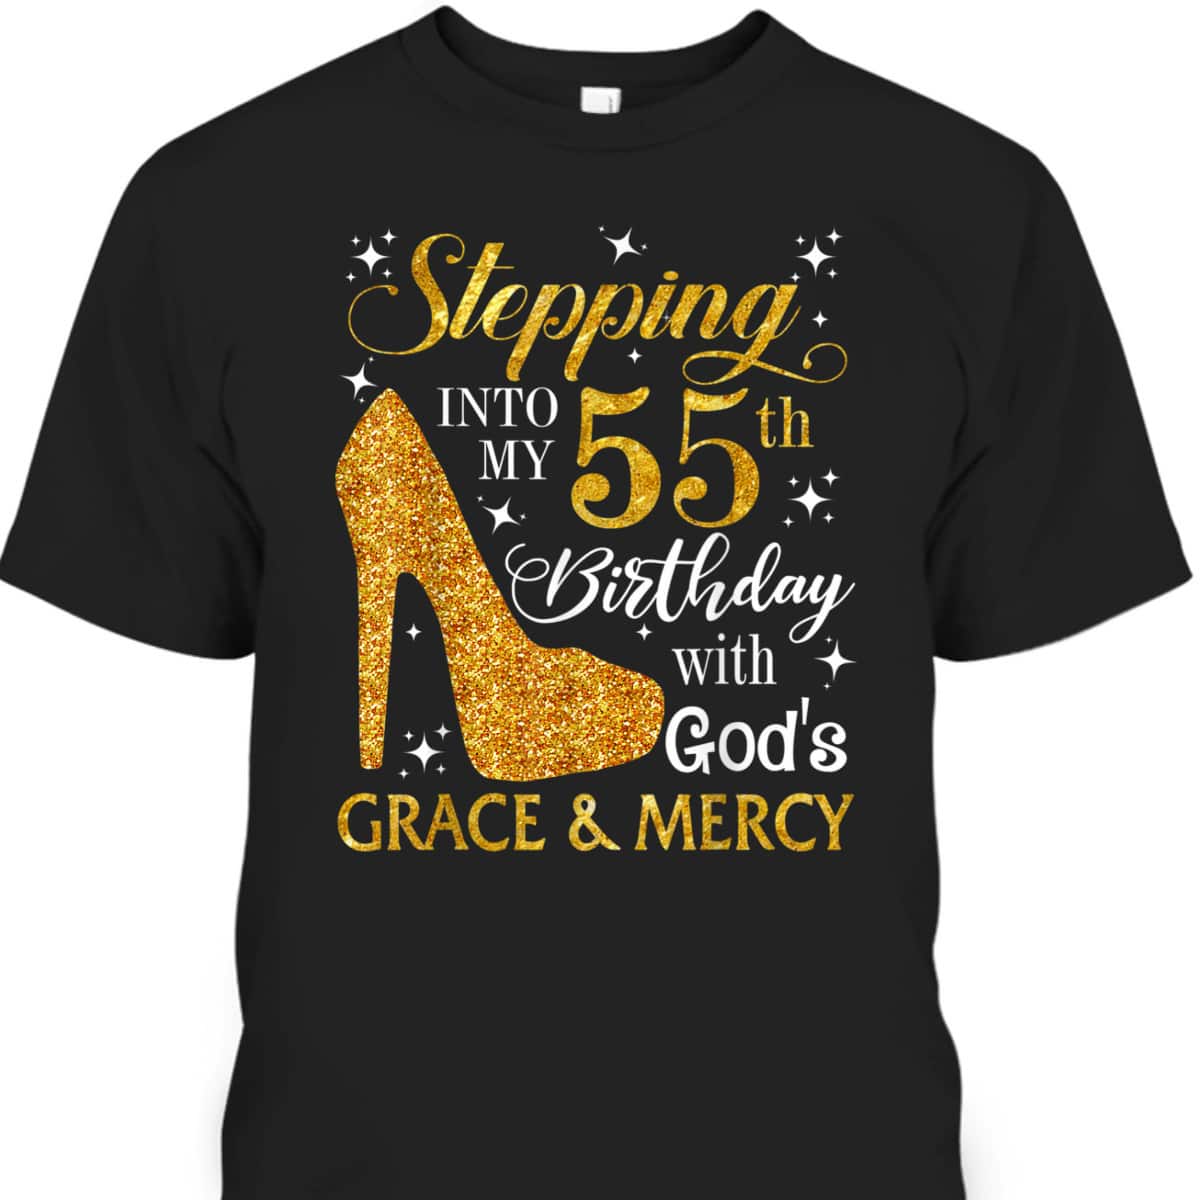 Christian Stepping Into My 55th Birthday With God's Grace & Mercy T-Shirt